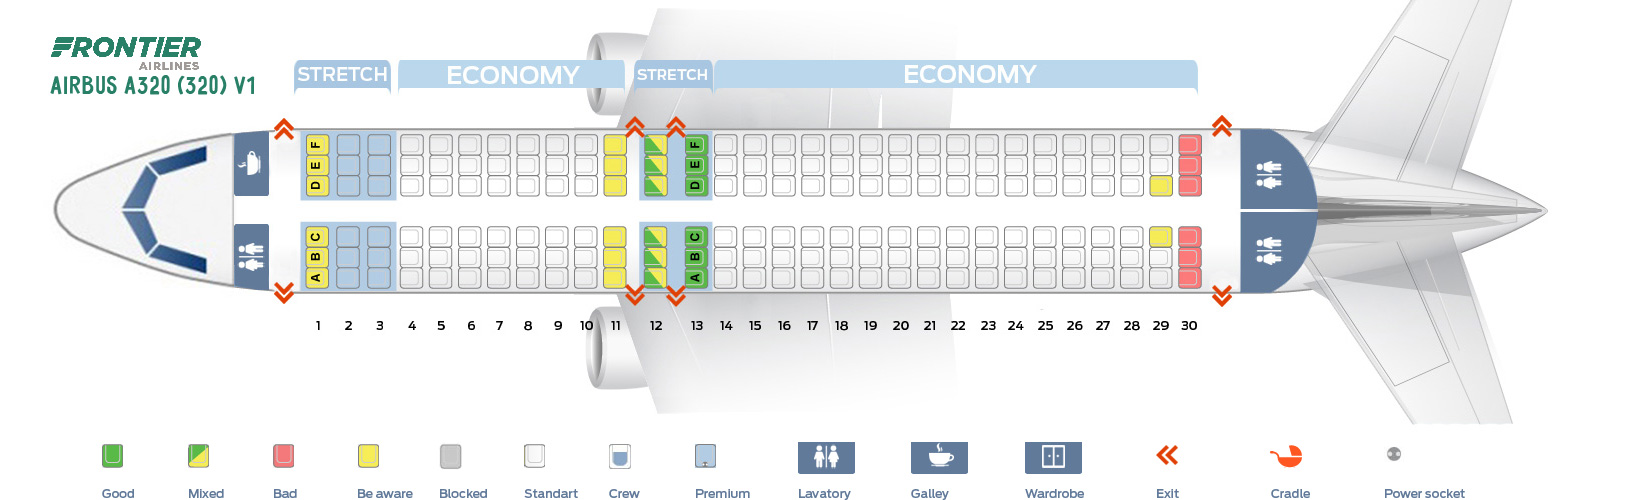 Seat map Airbus A320200 Frontier Airlines. Best seats in the plane